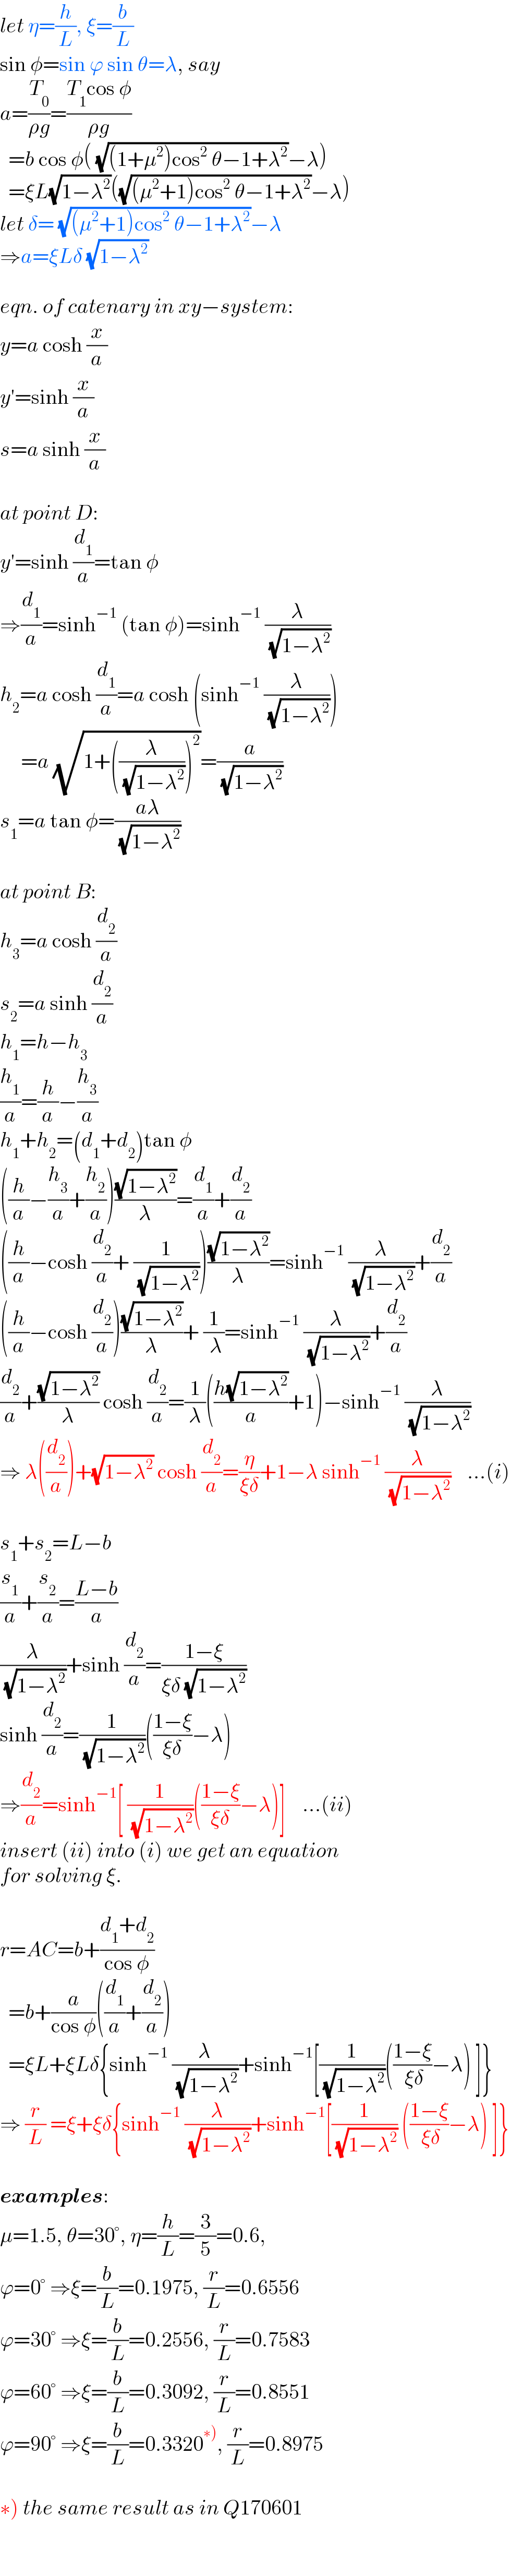 let η=(h/L), ξ=(b/L)  sin φ=sin ϕ sin θ=λ, say  a=(T_0 /(ρg))=((T_1 cos φ)/(ρg))    =b cos φ( (√((1+μ^2 )cos^2  θ−1+λ^2 ))−λ)    =ξL(√(1−λ^2 ))((√((μ^2 +1)cos^2  θ−1+λ^2 ))−λ)  let δ= (√((μ^2 +1)cos^2  θ−1+λ^2 ))−λ  ⇒a=ξLδ (√(1−λ^2 ))    eqn. of catenary in xy−system:  y=a cosh (x/a)  y′=sinh (x/a)  s=a sinh (x/a)    at point D:  y′=sinh (d_1 /a)=tan φ  ⇒(d_1 /a)=sinh^(−1)  (tan φ)=sinh^(−1)  (λ/( (√(1−λ^2 ))))  h_2 =a cosh (d_1 /a)=a cosh (sinh^(−1)  (λ/( (√(1−λ^2 )))))       =a (√(1+((λ/( (√(1−λ^2 )))))^2 ))=(a/( (√(1−λ^2 ))))  s_1 =a tan φ=((aλ)/( (√(1−λ^2 ))))    at point B:  h_3 =a cosh (d_2 /a)  s_2 =a sinh (d_2 /a)  h_1 =h−h_3   (h_1 /a)=(h/a)−(h_3 /a)  h_1 +h_2 =(d_1 +d_2 )tan φ  ((h/a)−(h_3 /a)+(h_2 /a))((√(1−λ^2 ))/λ)=(d_1 /a)+(d_2 /a)  ((h/a)−cosh (d_2 /a)+ (1/( (√(1−λ^2 )))))((√(1−λ^2 ))/λ)=sinh^(−1)  (λ/( (√(1−λ^2 ))))+(d_2 /a)  ((h/a)−cosh (d_2 /a))((√(1−λ^2 ))/λ)+ (1/( λ))=sinh^(−1)  (λ/( (√(1−λ^2 ))))+(d_2 /a)  (d_2 /a)+((√(1−λ^2 ))/λ) cosh (d_2 /a)=(1/λ)(((h(√(1−λ^2 )))/a)+1)−sinh^(−1)  (λ/( (√(1−λ^2 ))))  ⇒ λ((d_2 /a))+(√(1−λ^2 )) cosh (d_2 /a)=(η/(ξδ))+1−λ sinh^(−1)  (λ/( (√(1−λ^2 ))))    ...(i)    s_1 +s_2 =L−b  (s_1 /a)+(s_2 /a)=((L−b)/a)  (λ/( (√(1−λ^2 ))))+sinh (d_2 /a)=((1−ξ)/(ξδ (√(1−λ^2 ))))  sinh (d_2 /a)=(1/( (√(1−λ^2 ))))(((1−ξ)/(ξδ))−λ)  ⇒(d_2 /a)=sinh^(−1) [ (1/( (√(1−λ^2 ))))(((1−ξ)/(ξδ))−λ)]    ...(ii)  insert (ii) into (i) we get an equation  for solving ξ.    r=AC=b+((d_1 +d_2 )/(cos φ))    =b+(a/(cos φ))((d_1 /a)+(d_2 /a))    =ξL+ξLδ{sinh^(−1)  (λ/( (√(1−λ^2 ))))+sinh^(−1) [(1/( (√(1−λ^2 ))))(((1−ξ)/( ξδ))−λ) ]}  ⇒ (r/L) =ξ+ξδ{sinh^(−1)  (λ/( (√(1−λ^2 ))))+sinh^(−1) [(1/( (√(1−λ^2 )))) (((1−ξ)/( ξδ))−λ) ]}    examples:  μ=1.5, θ=30°, η=(h/L)=(3/5)=0.6,  ϕ=0° ⇒ξ=(b/L)=0.1975, (r/L)=0.6556  ϕ=30° ⇒ξ=(b/L)=0.2556, (r/L)=0.7583  ϕ=60° ⇒ξ=(b/L)=0.3092, (r/L)=0.8551  ϕ=90° ⇒ξ=(b/L)=0.3320^(∗)) , (r/L)=0.8975    ∗) the same result as in Q170601  